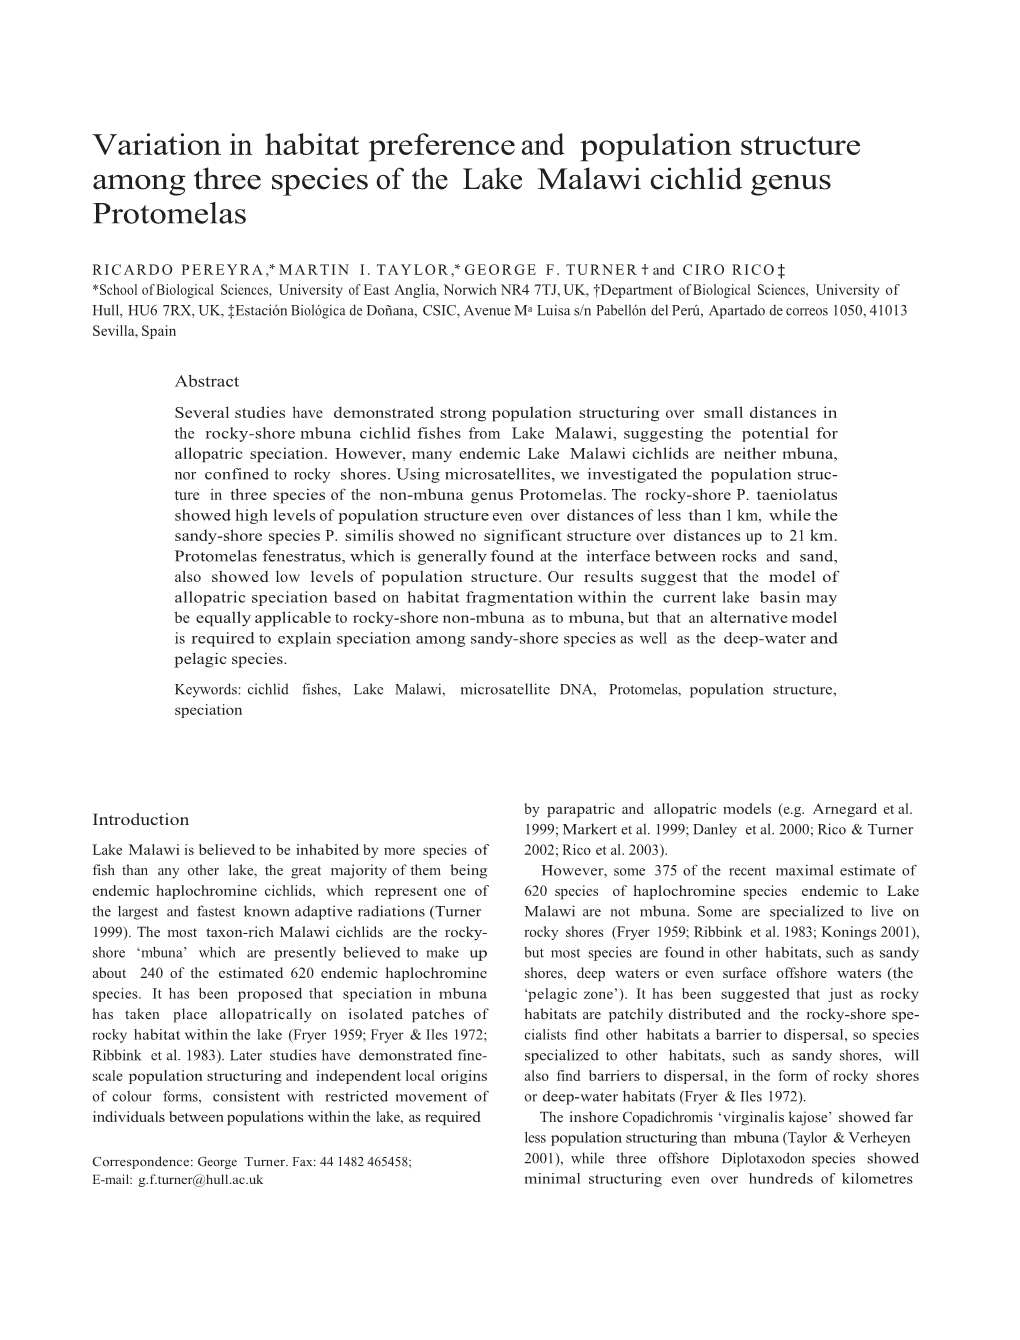 Variation in Habitat Preference and Population Structure Among Three Species of the Lake Malawi Cichlid Genus Protomelas